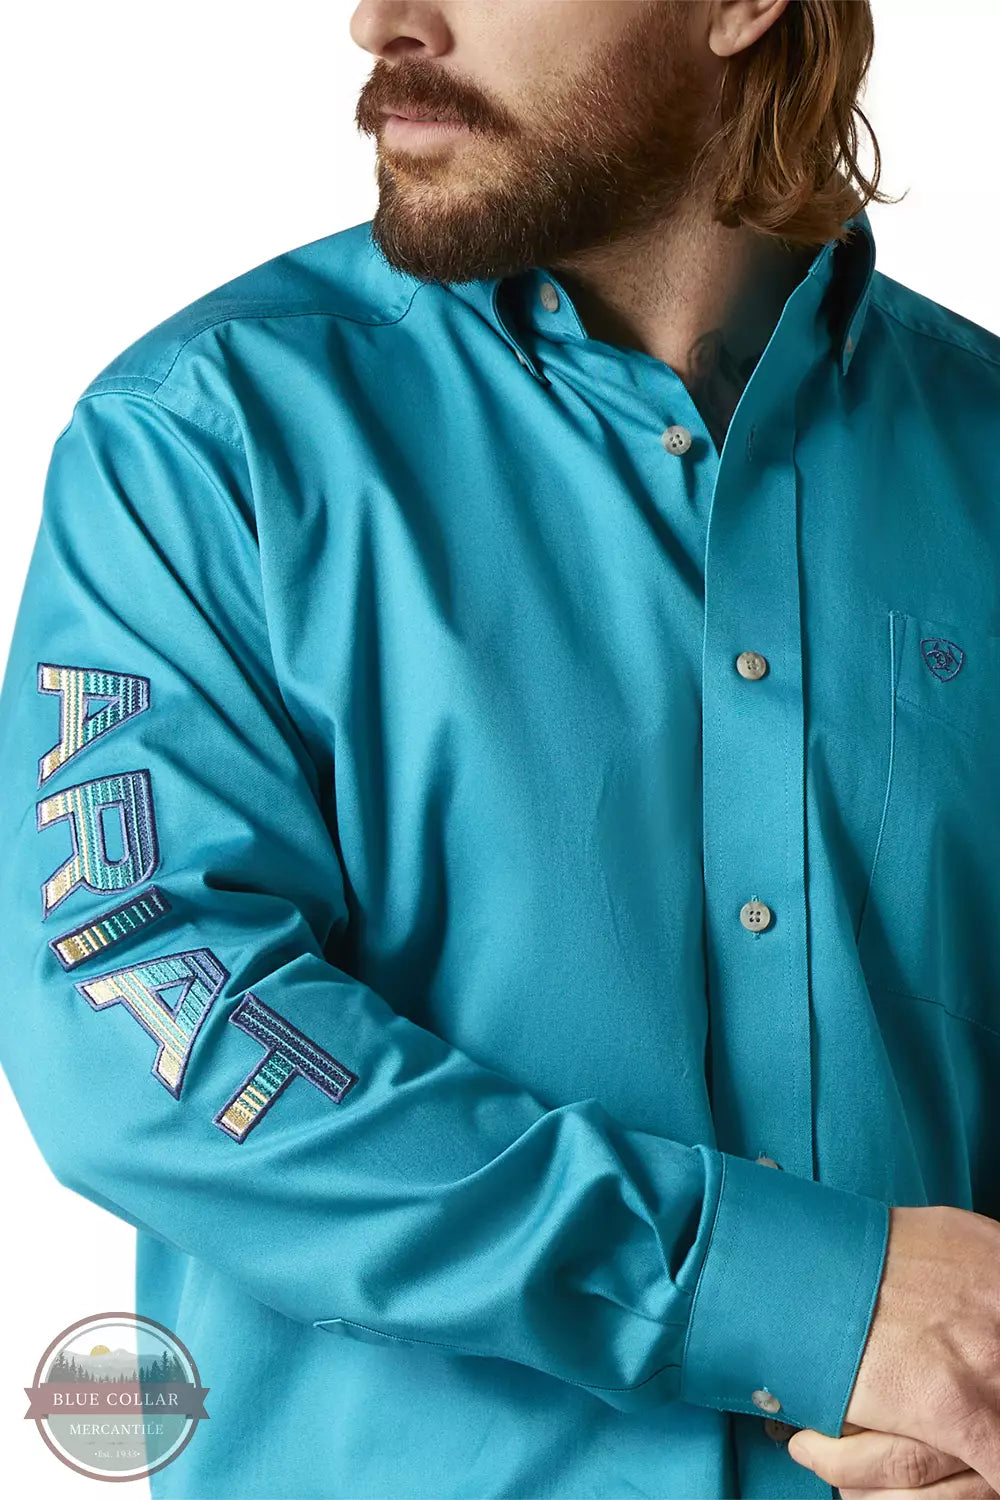 Ariat 10046720 Team Logo Twill Long Sleeve Shirt in Turquoise Deal View